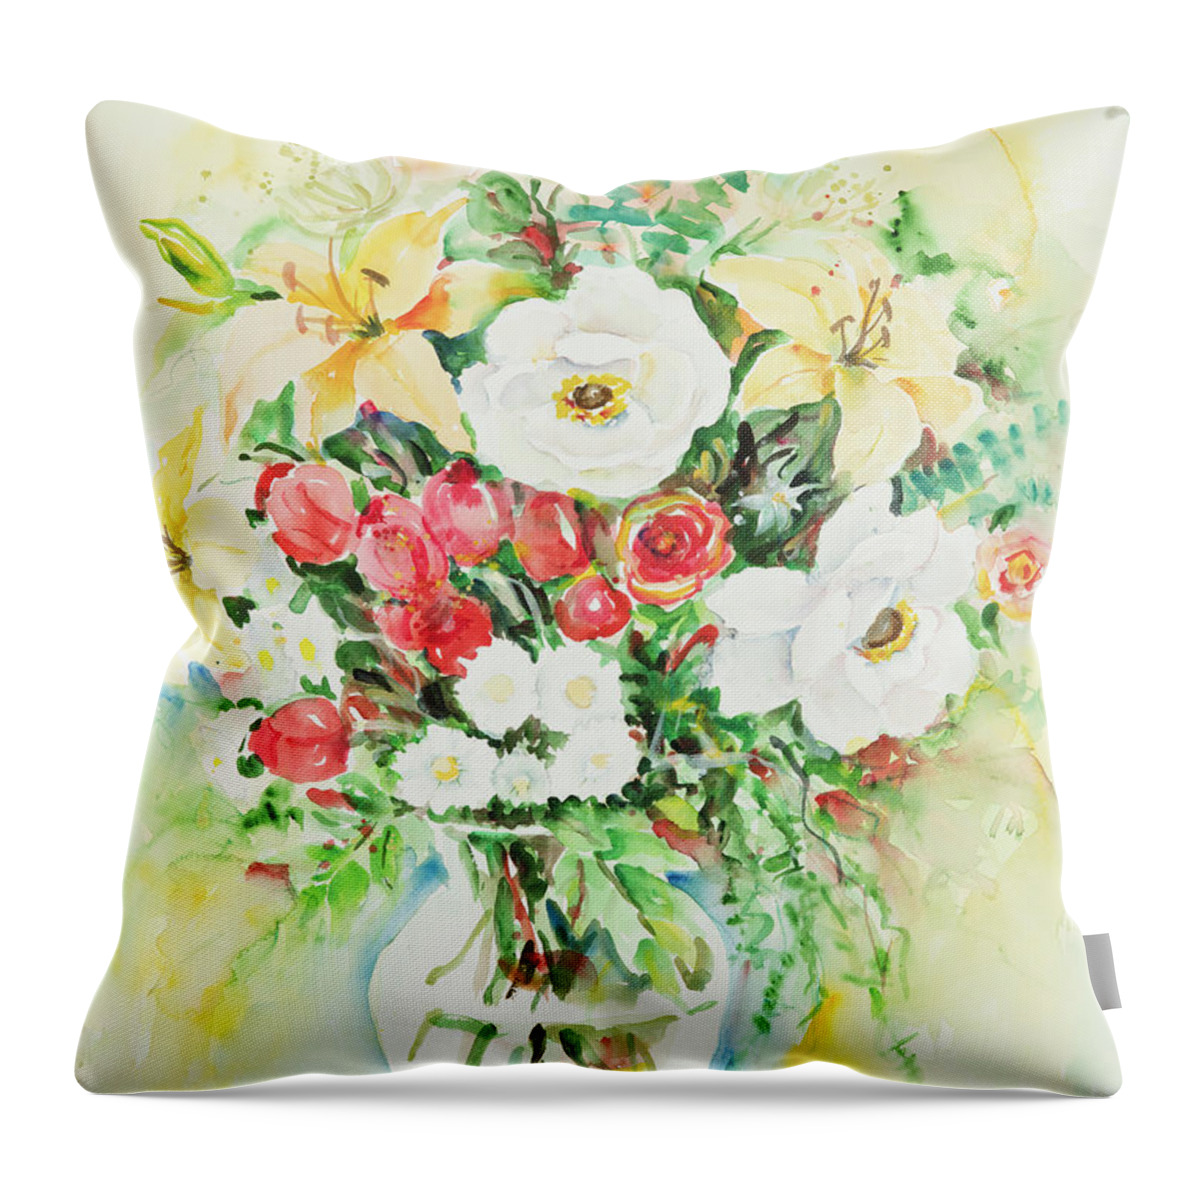 Flowers Throw Pillow featuring the painting Watercolor Series 113 by Ingrid Dohm